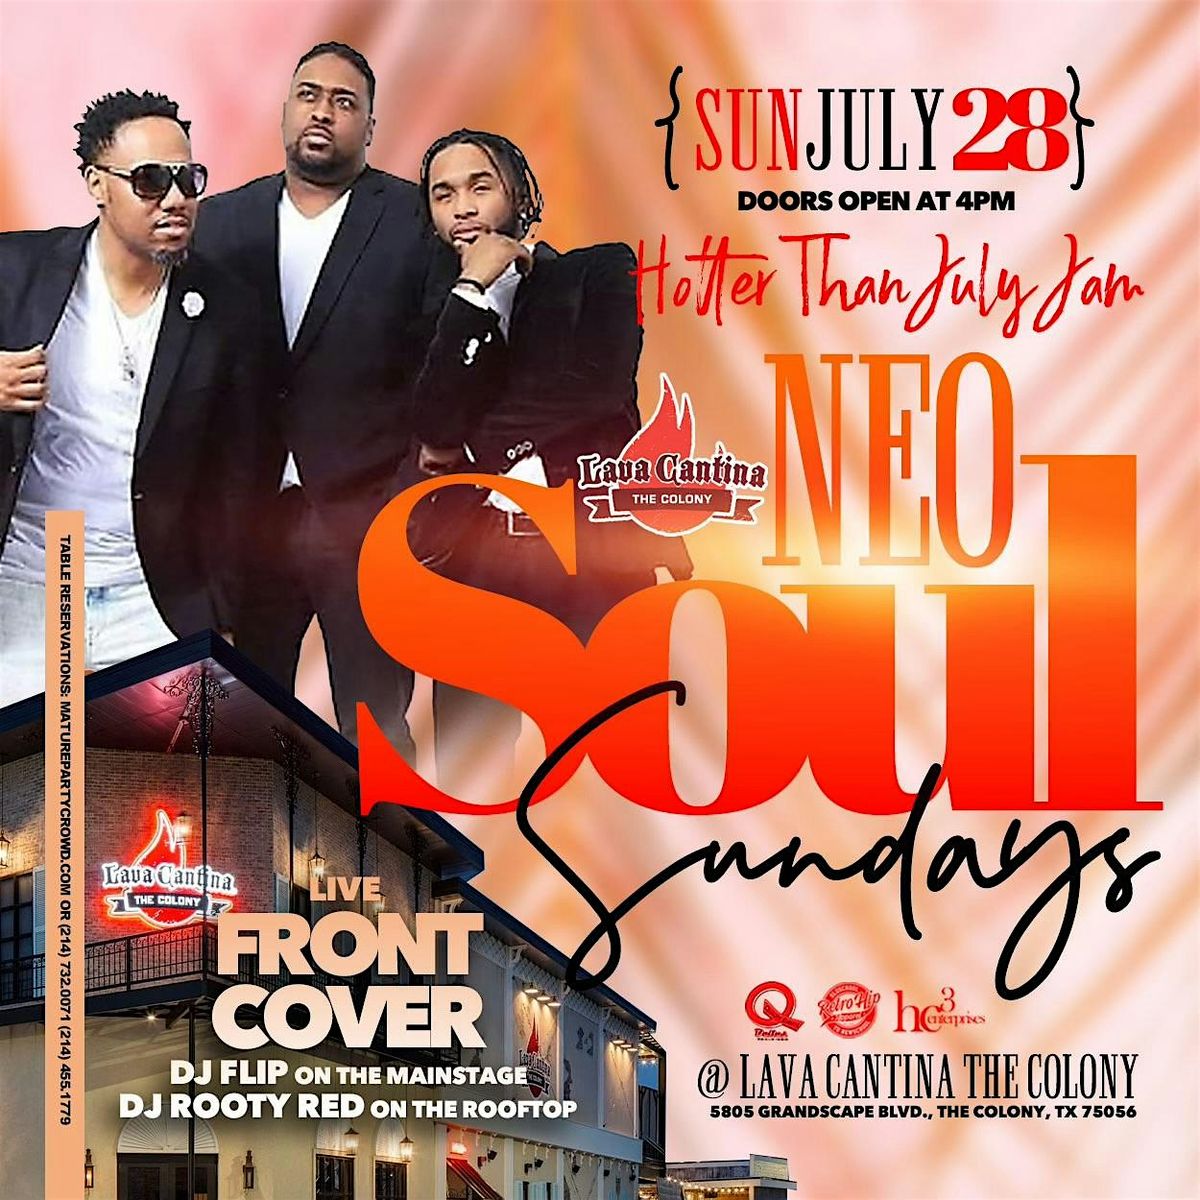 NEO SOUL SUNDAYS [HOTTER THAN JULY JAM] feat FRONT COVER @ Lava Cantina